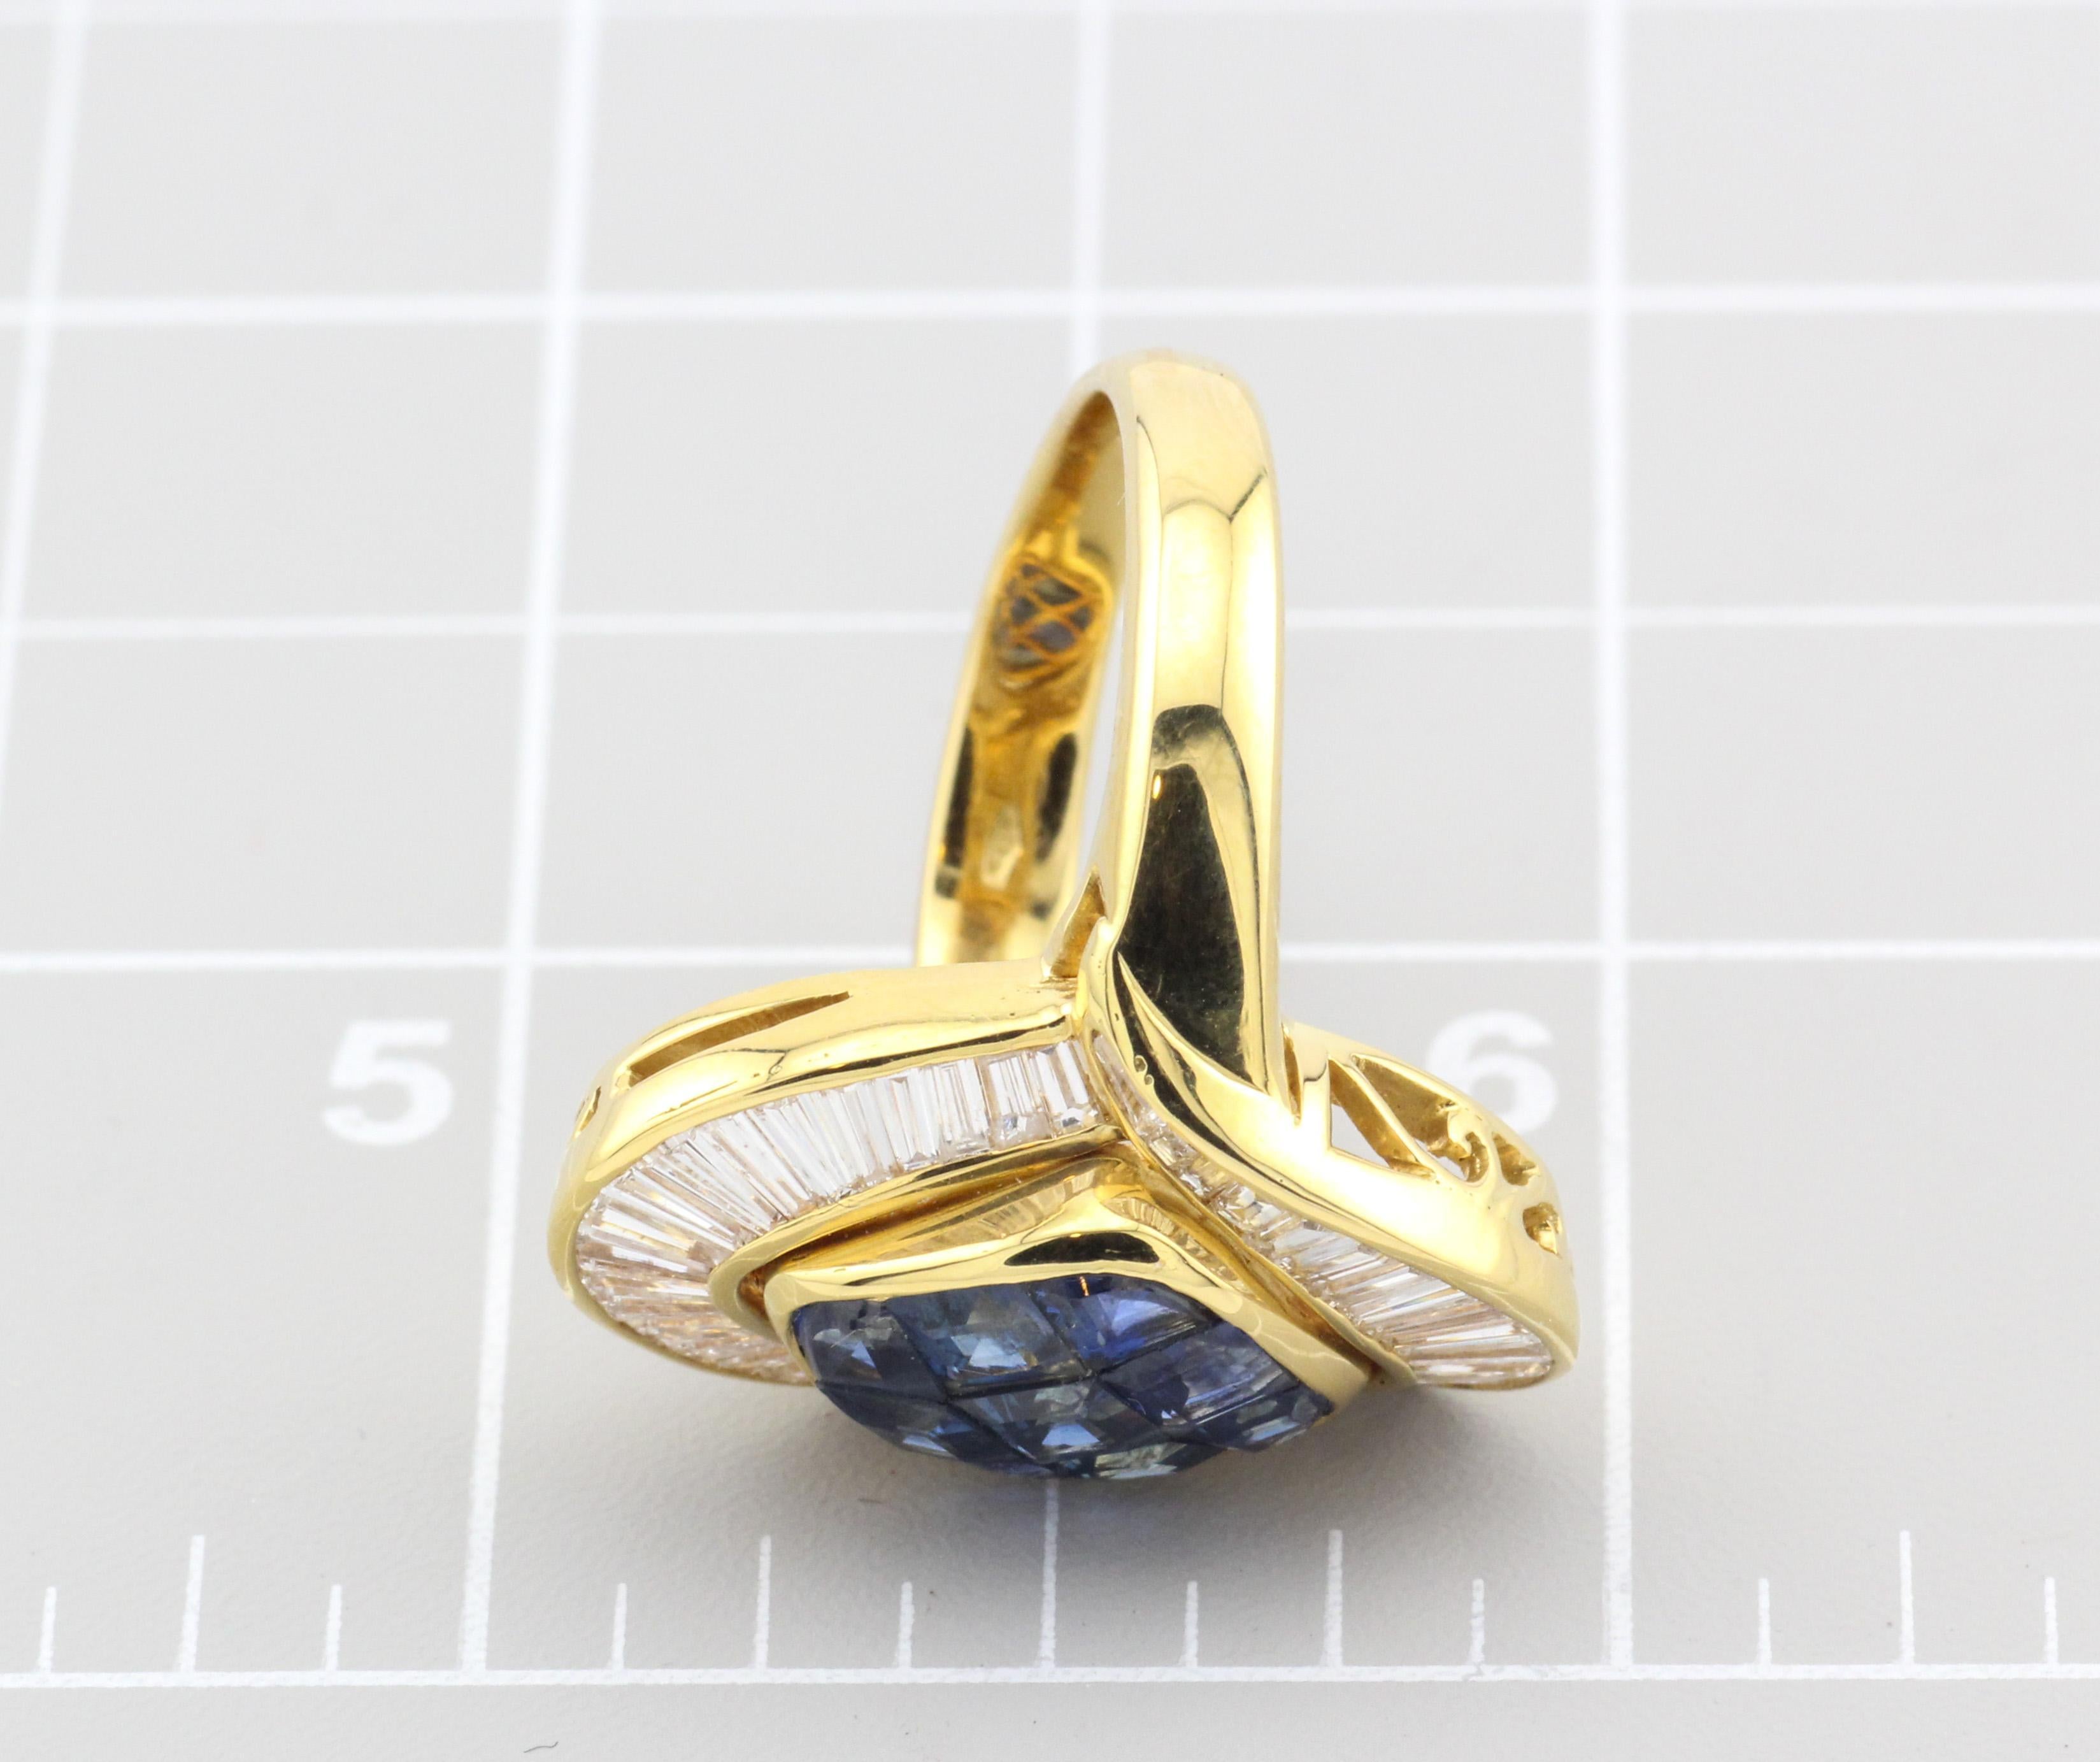 Mouawad Mystery Set Sapphire Diamond 18k Yellow Gold Ring Size 6.75 For Sale 4